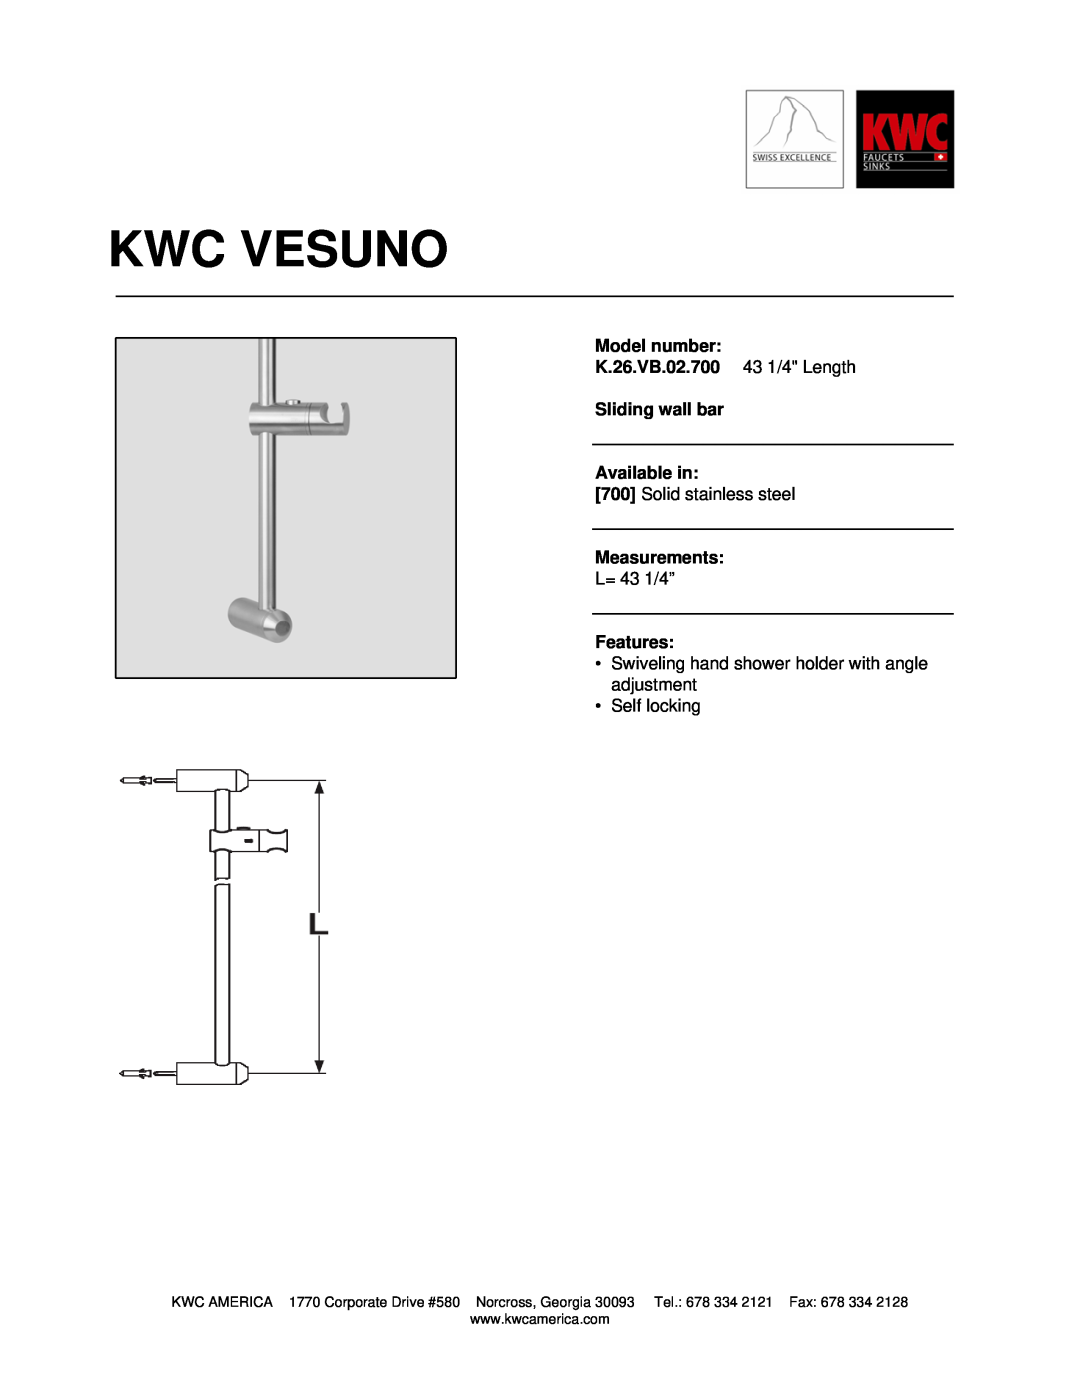 KWC manual Kwc Vesuno, Model number K.26.VB.02.700 43 1/4 Length, Sliding wall bar Available in, Solid stainless steel 